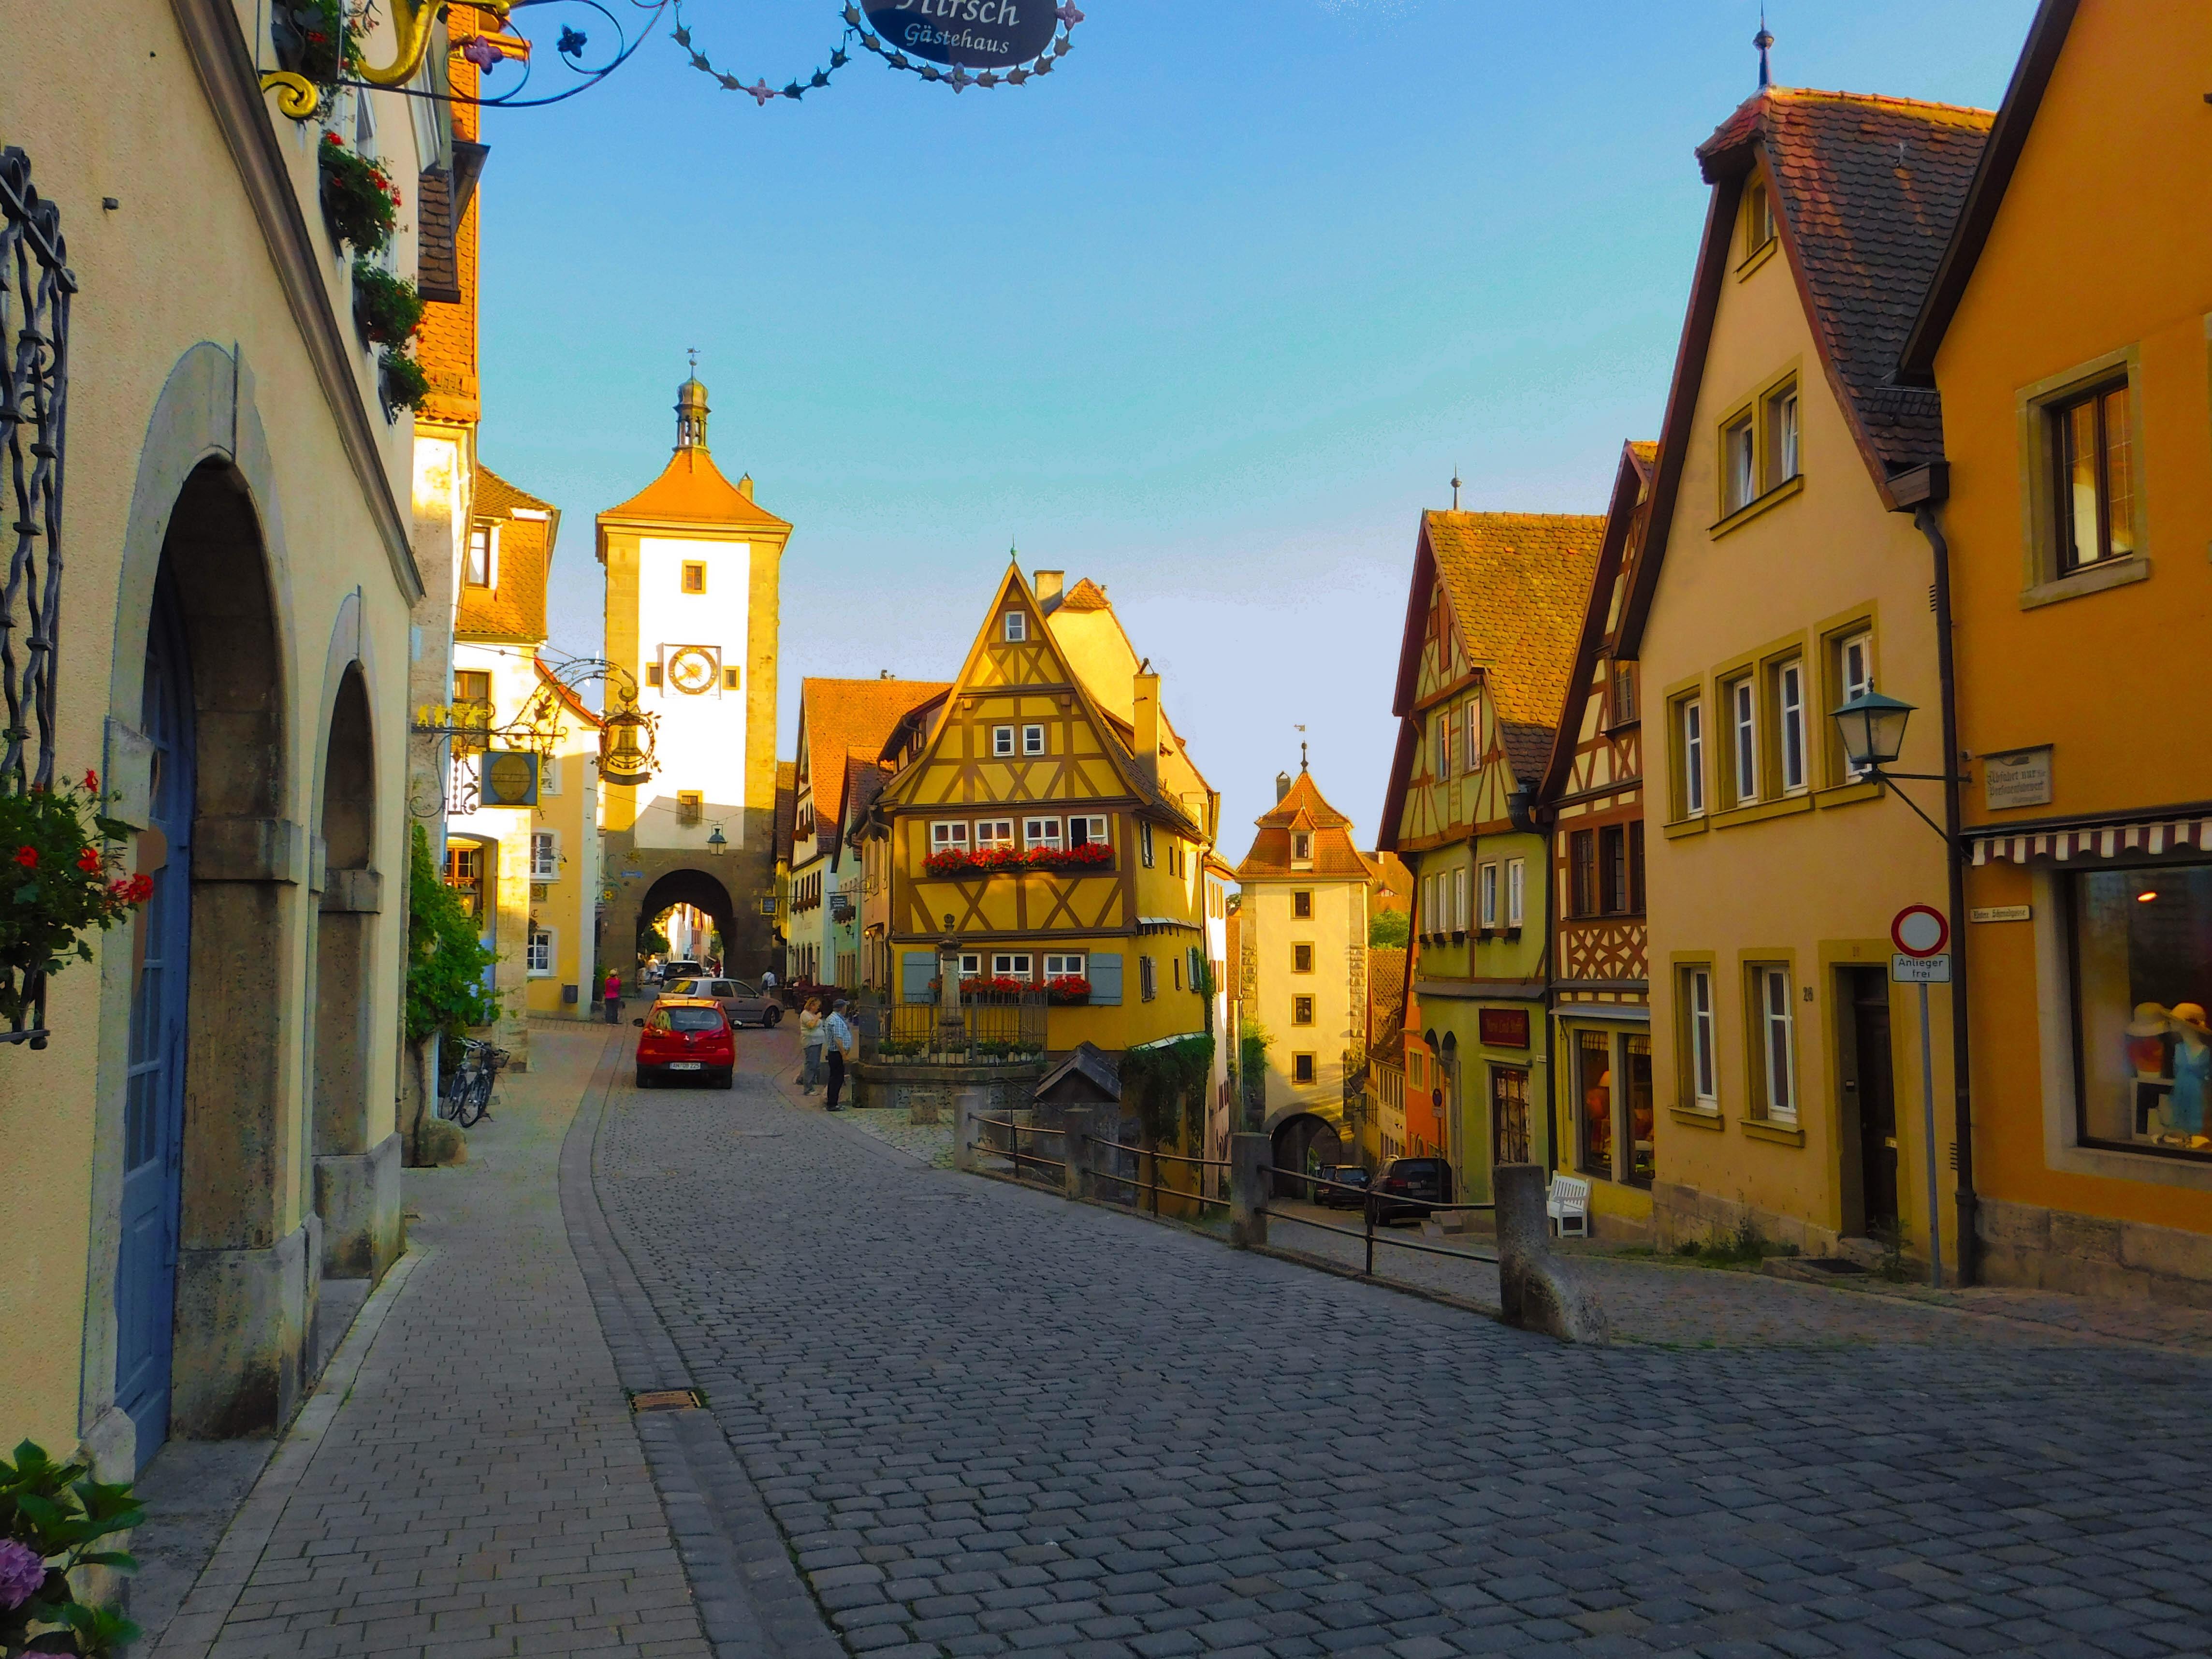 Rothenburg ob der Tauber, Germany. It's one of the few German ...